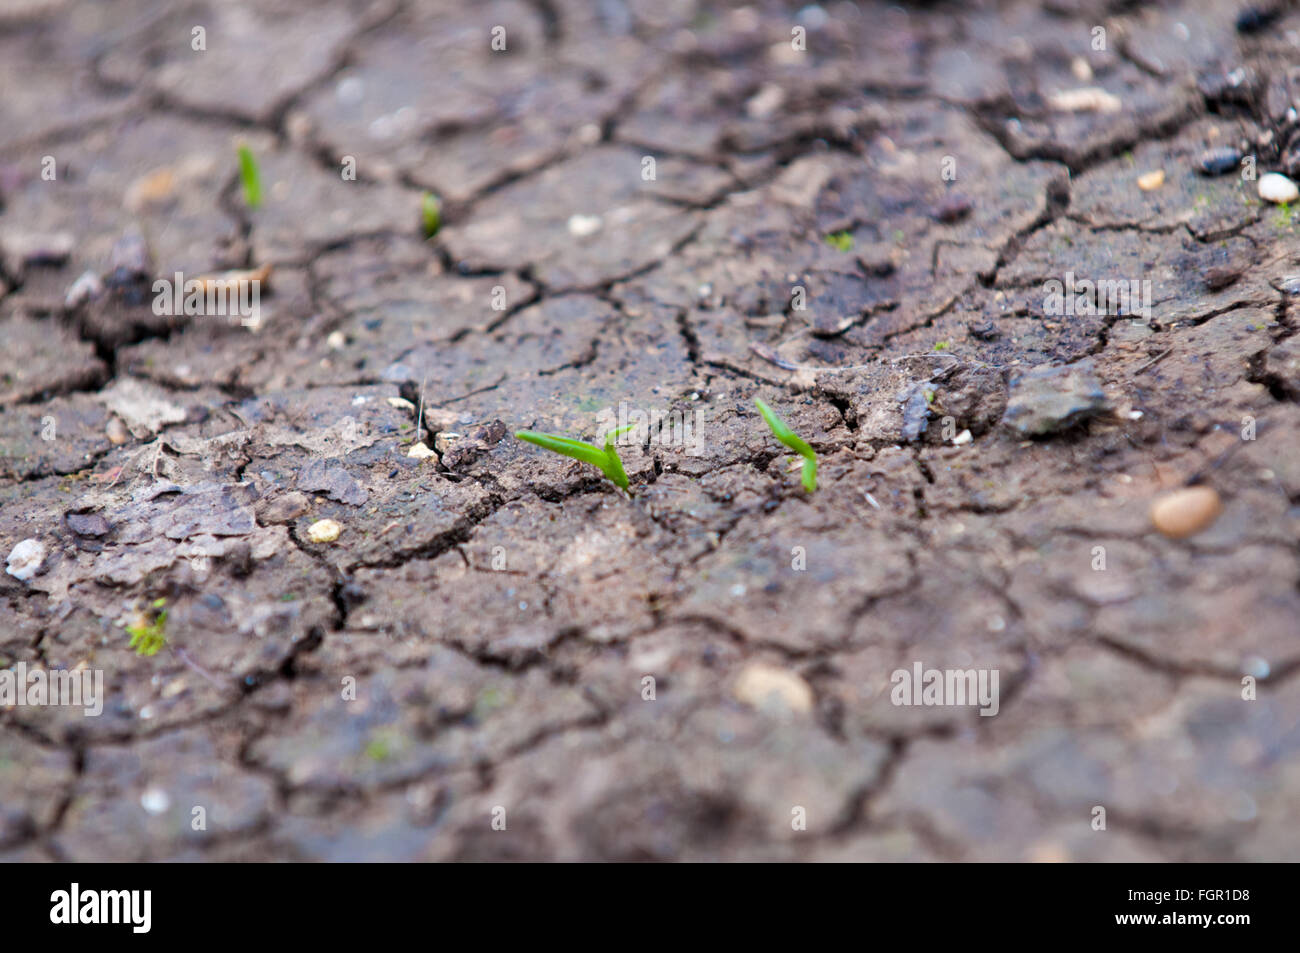 Tiny new plant growing from cracked dry earth in the forest Stock Photo